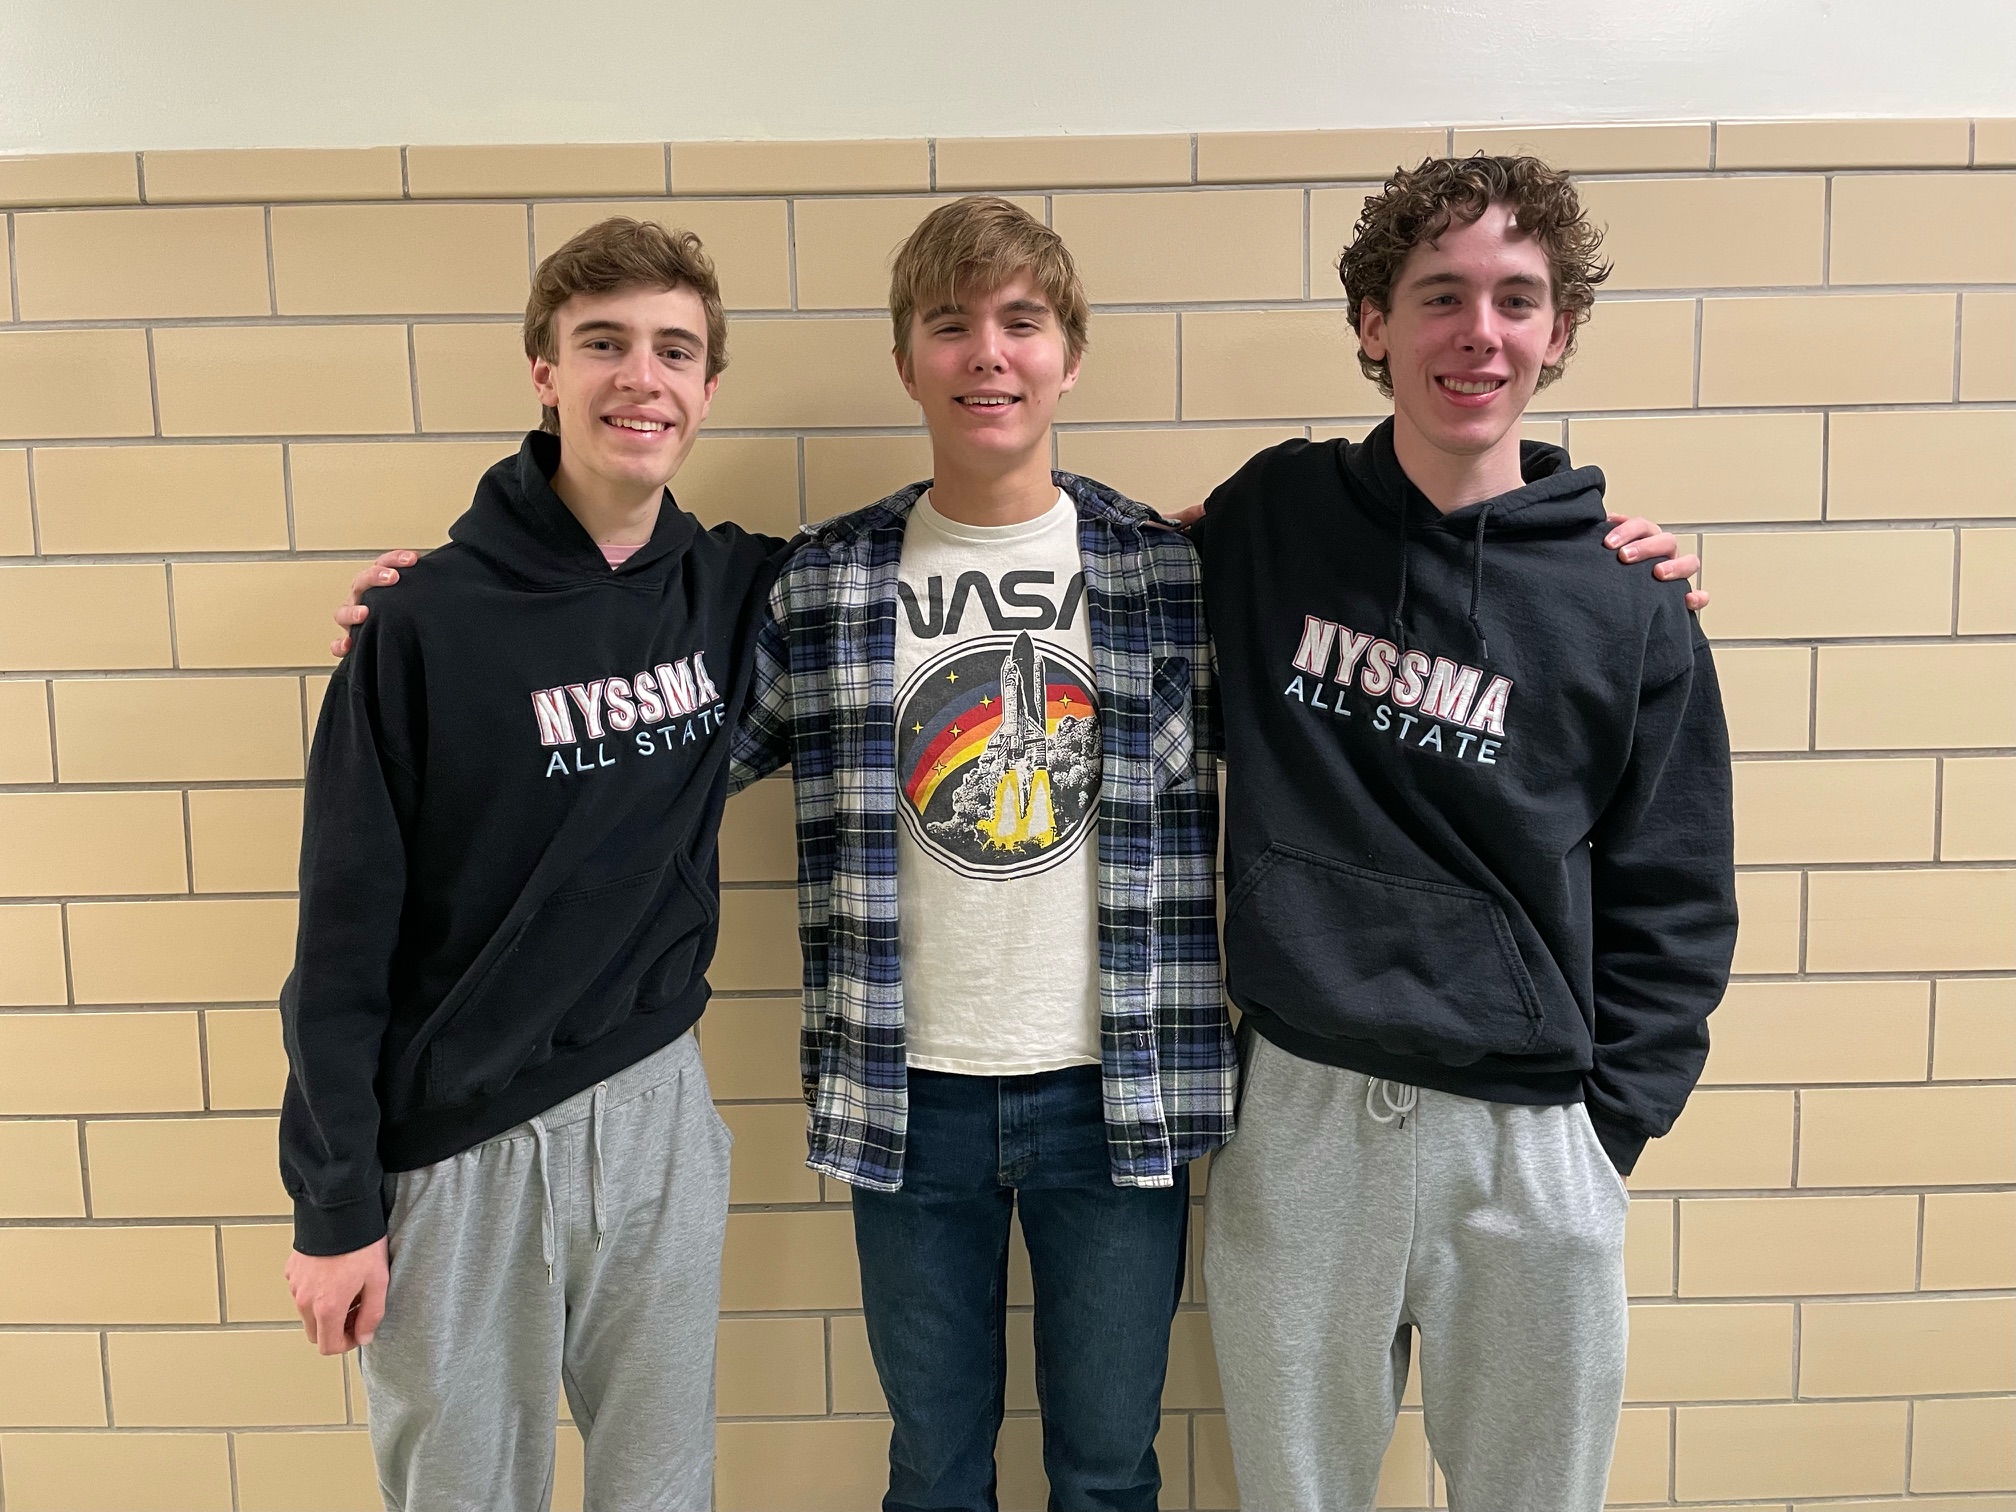 Three Skaneateles students were selected to the Conference All-State ensembles this year.  Tommy Cattalani was selected as an alternate for saxophone.  Braden Gryzlo and Ryan Persampieri will perform with the chorus again this year on Sunday, Dec. 3 at the Eastman Theatre in Rochester. 